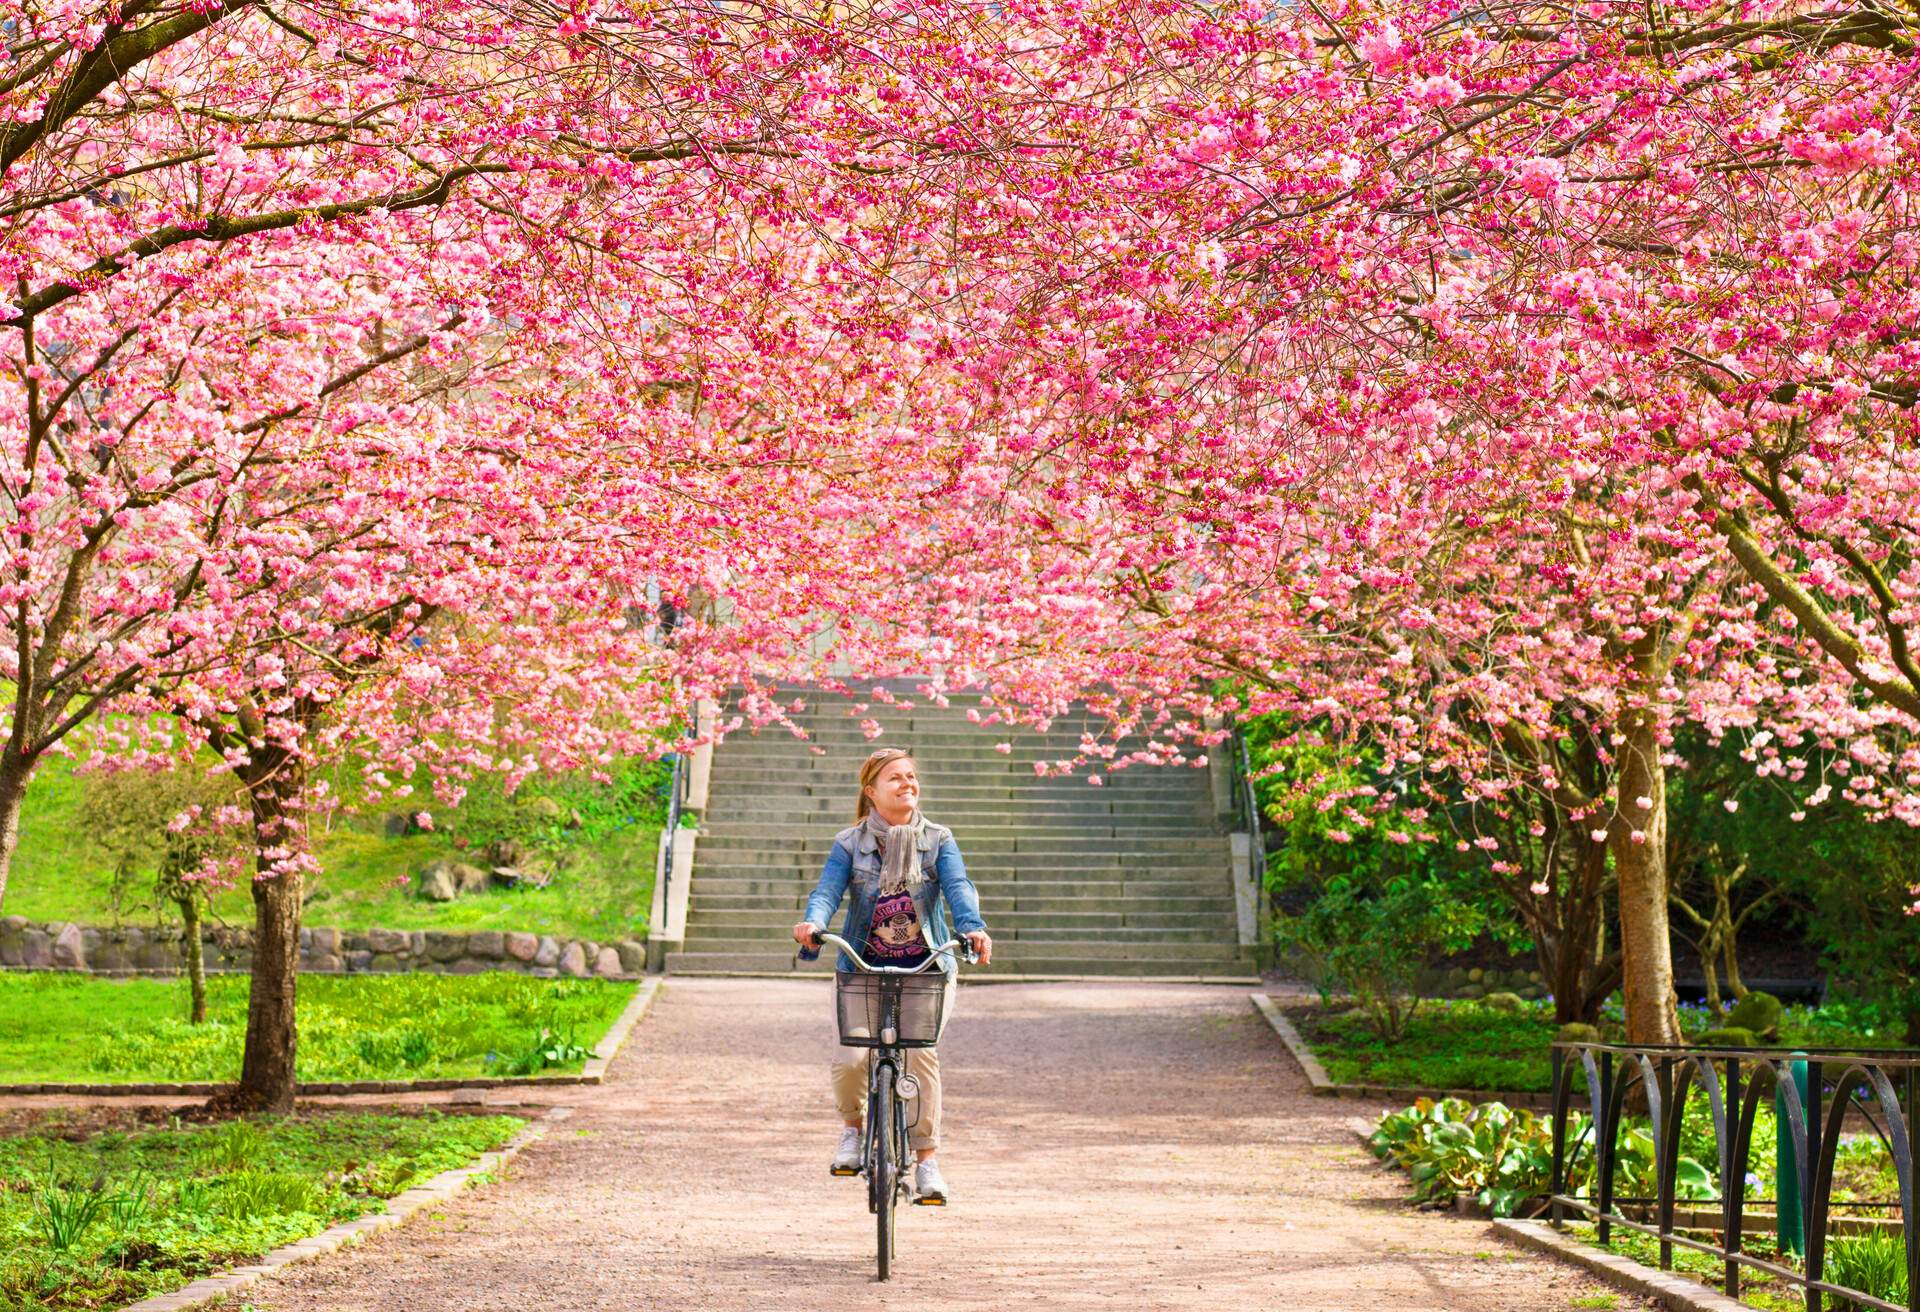 dest_sweden_gothenburg_theme_bike_cycling_spring_gettyimages-596579211_universal_within-usage-period_83700